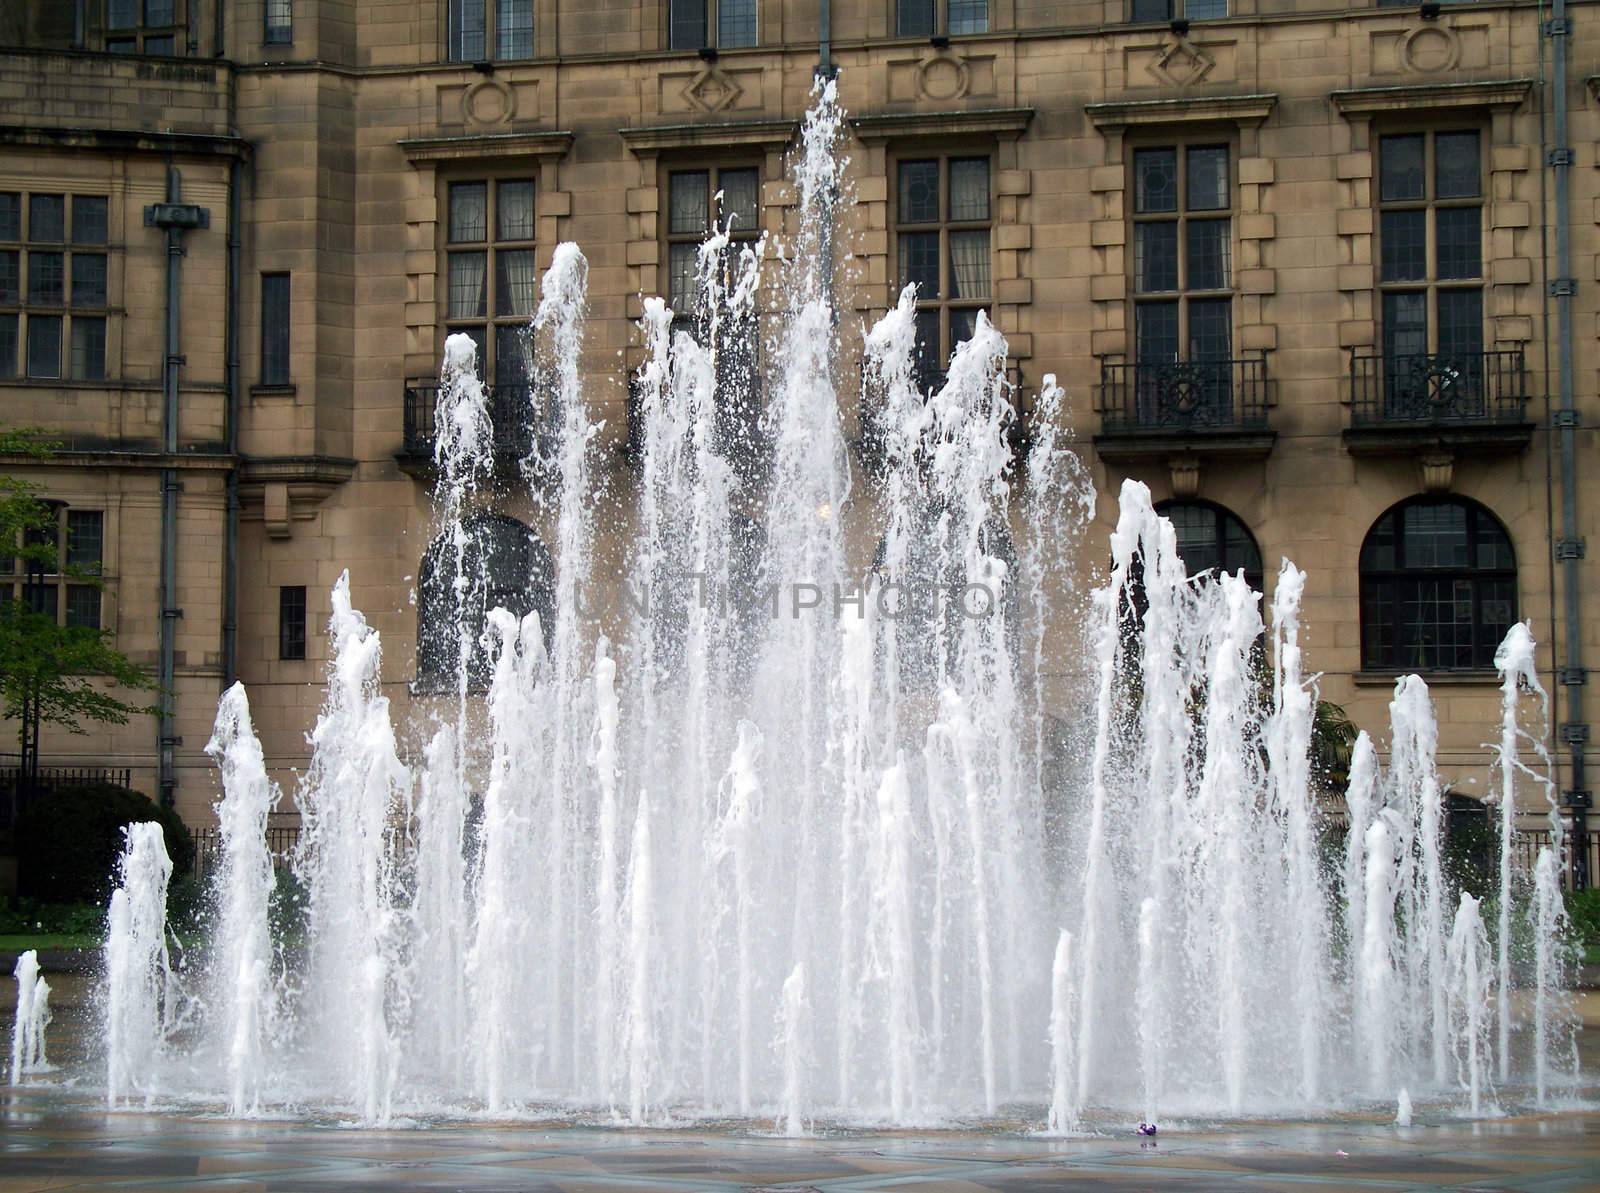 Sheffield Peace Gardens by pwillitts